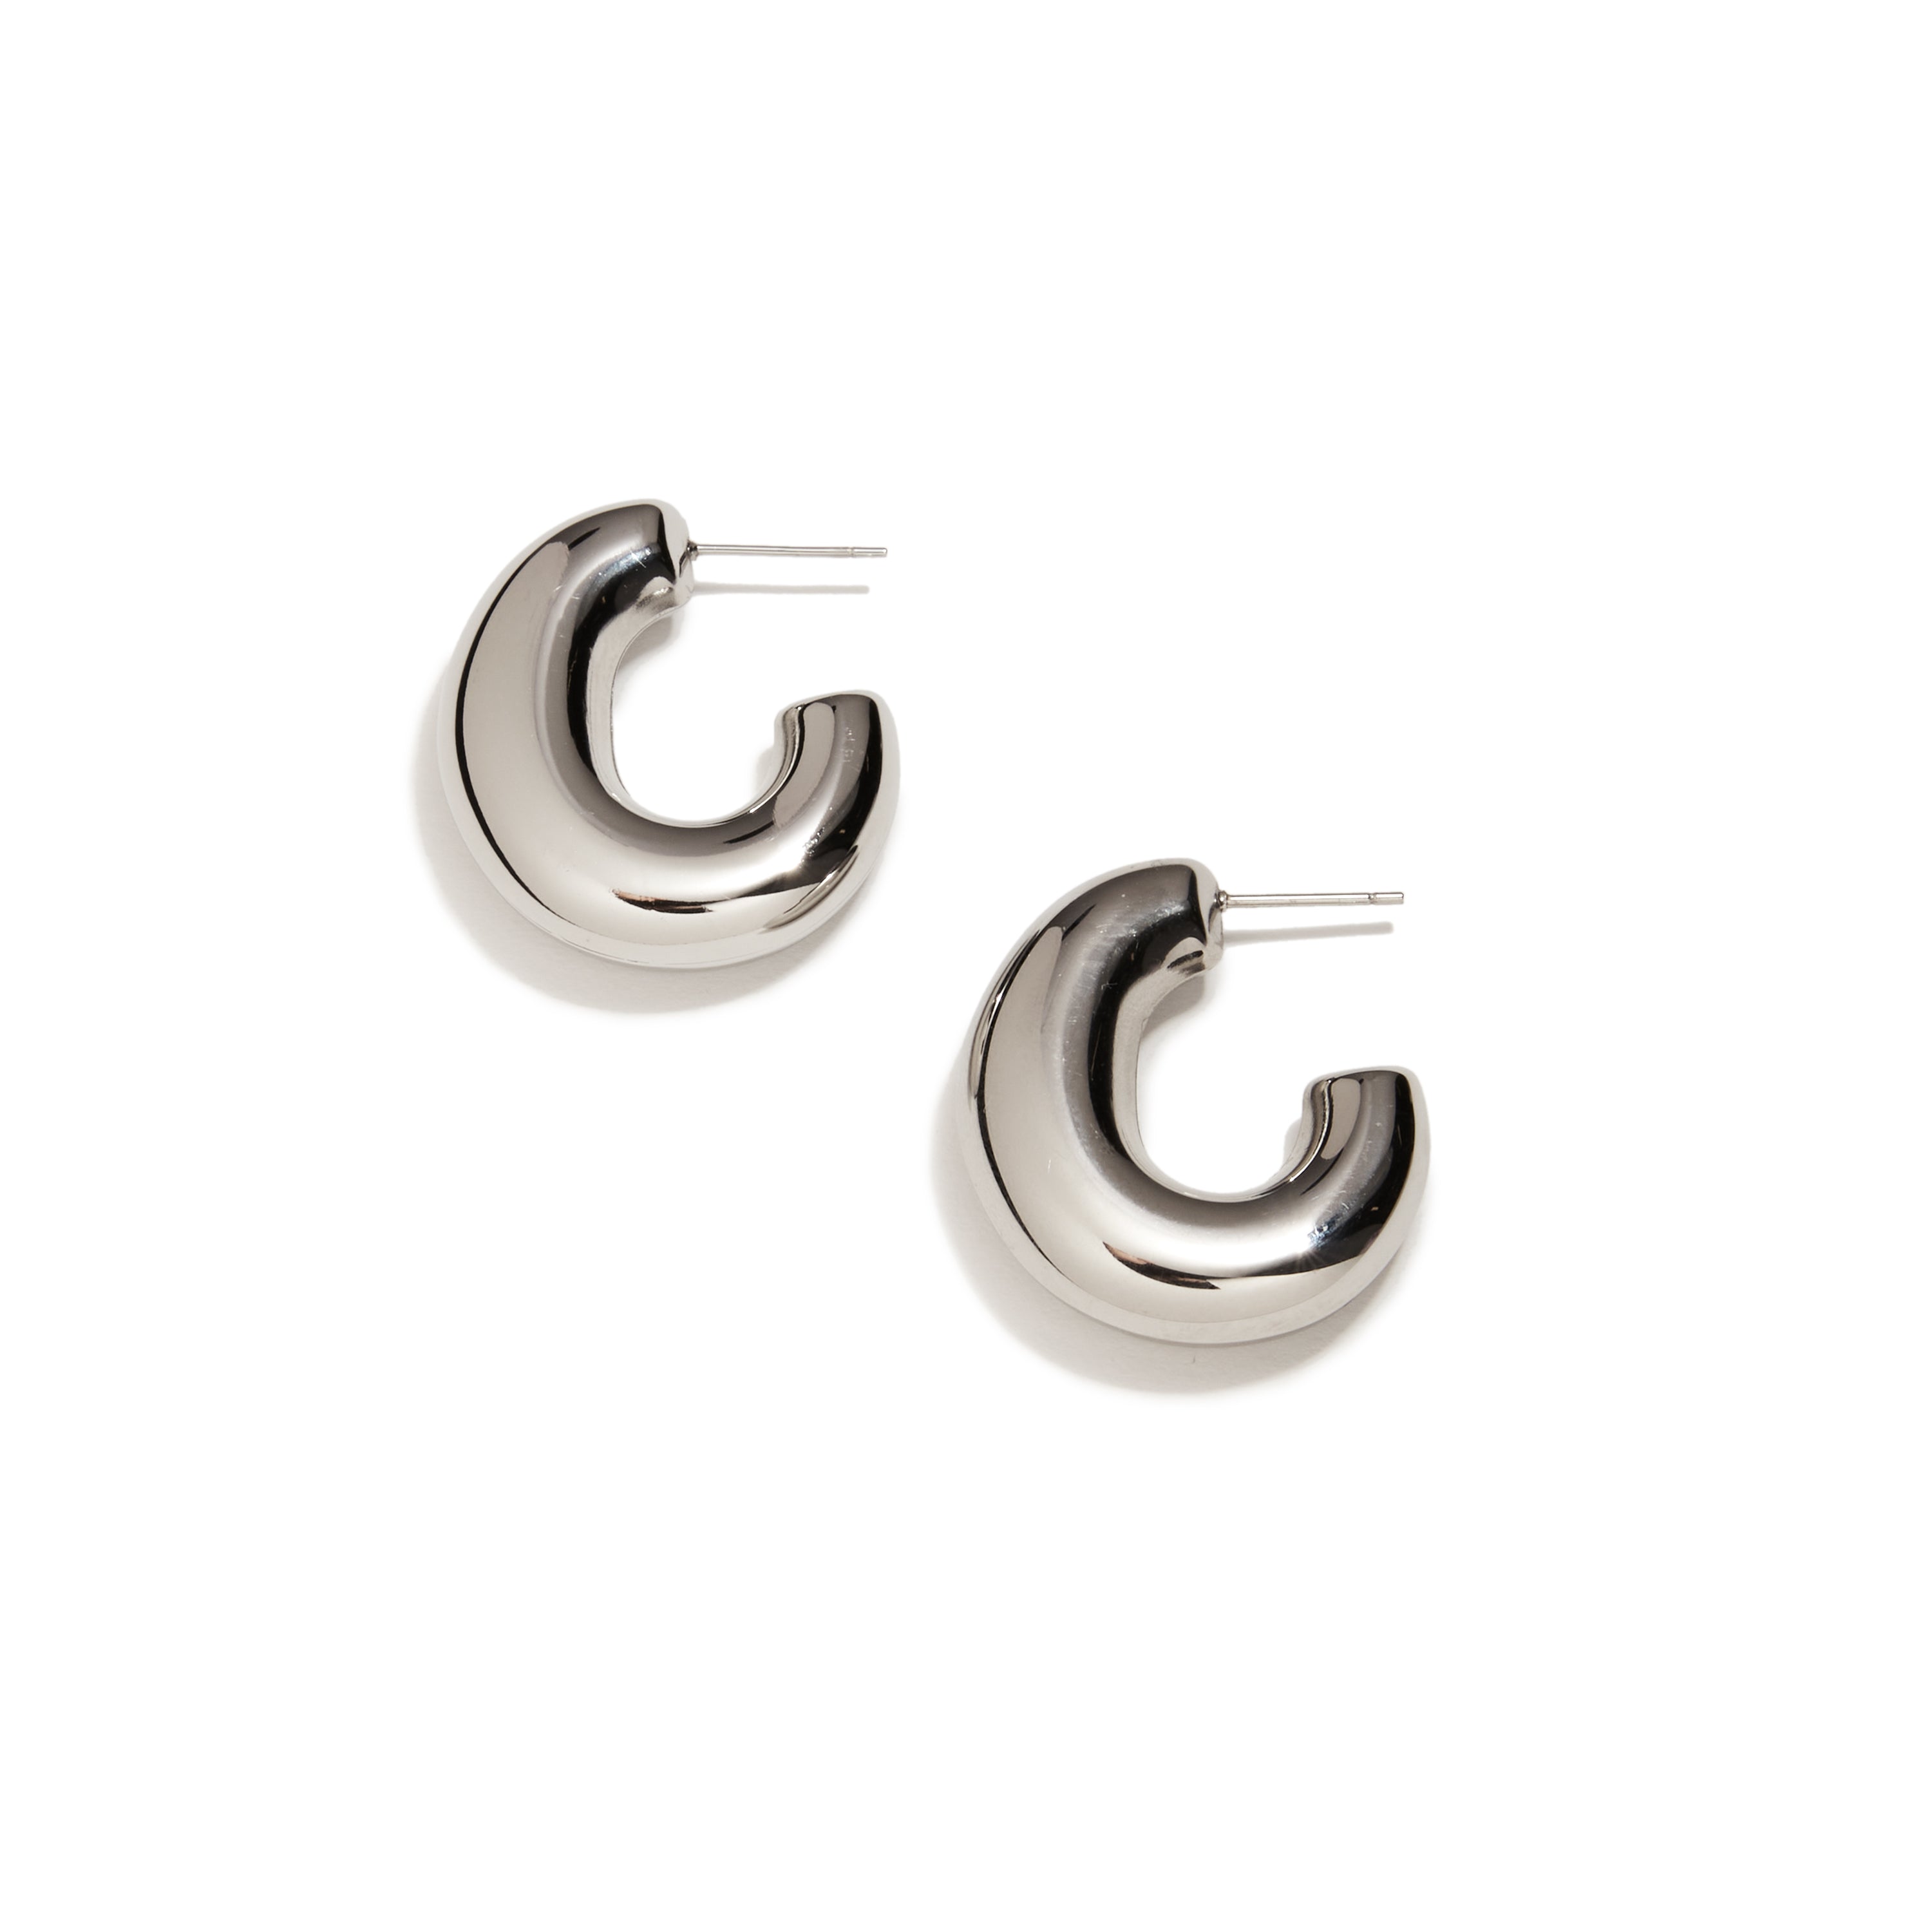 Thick hallow silver hoops